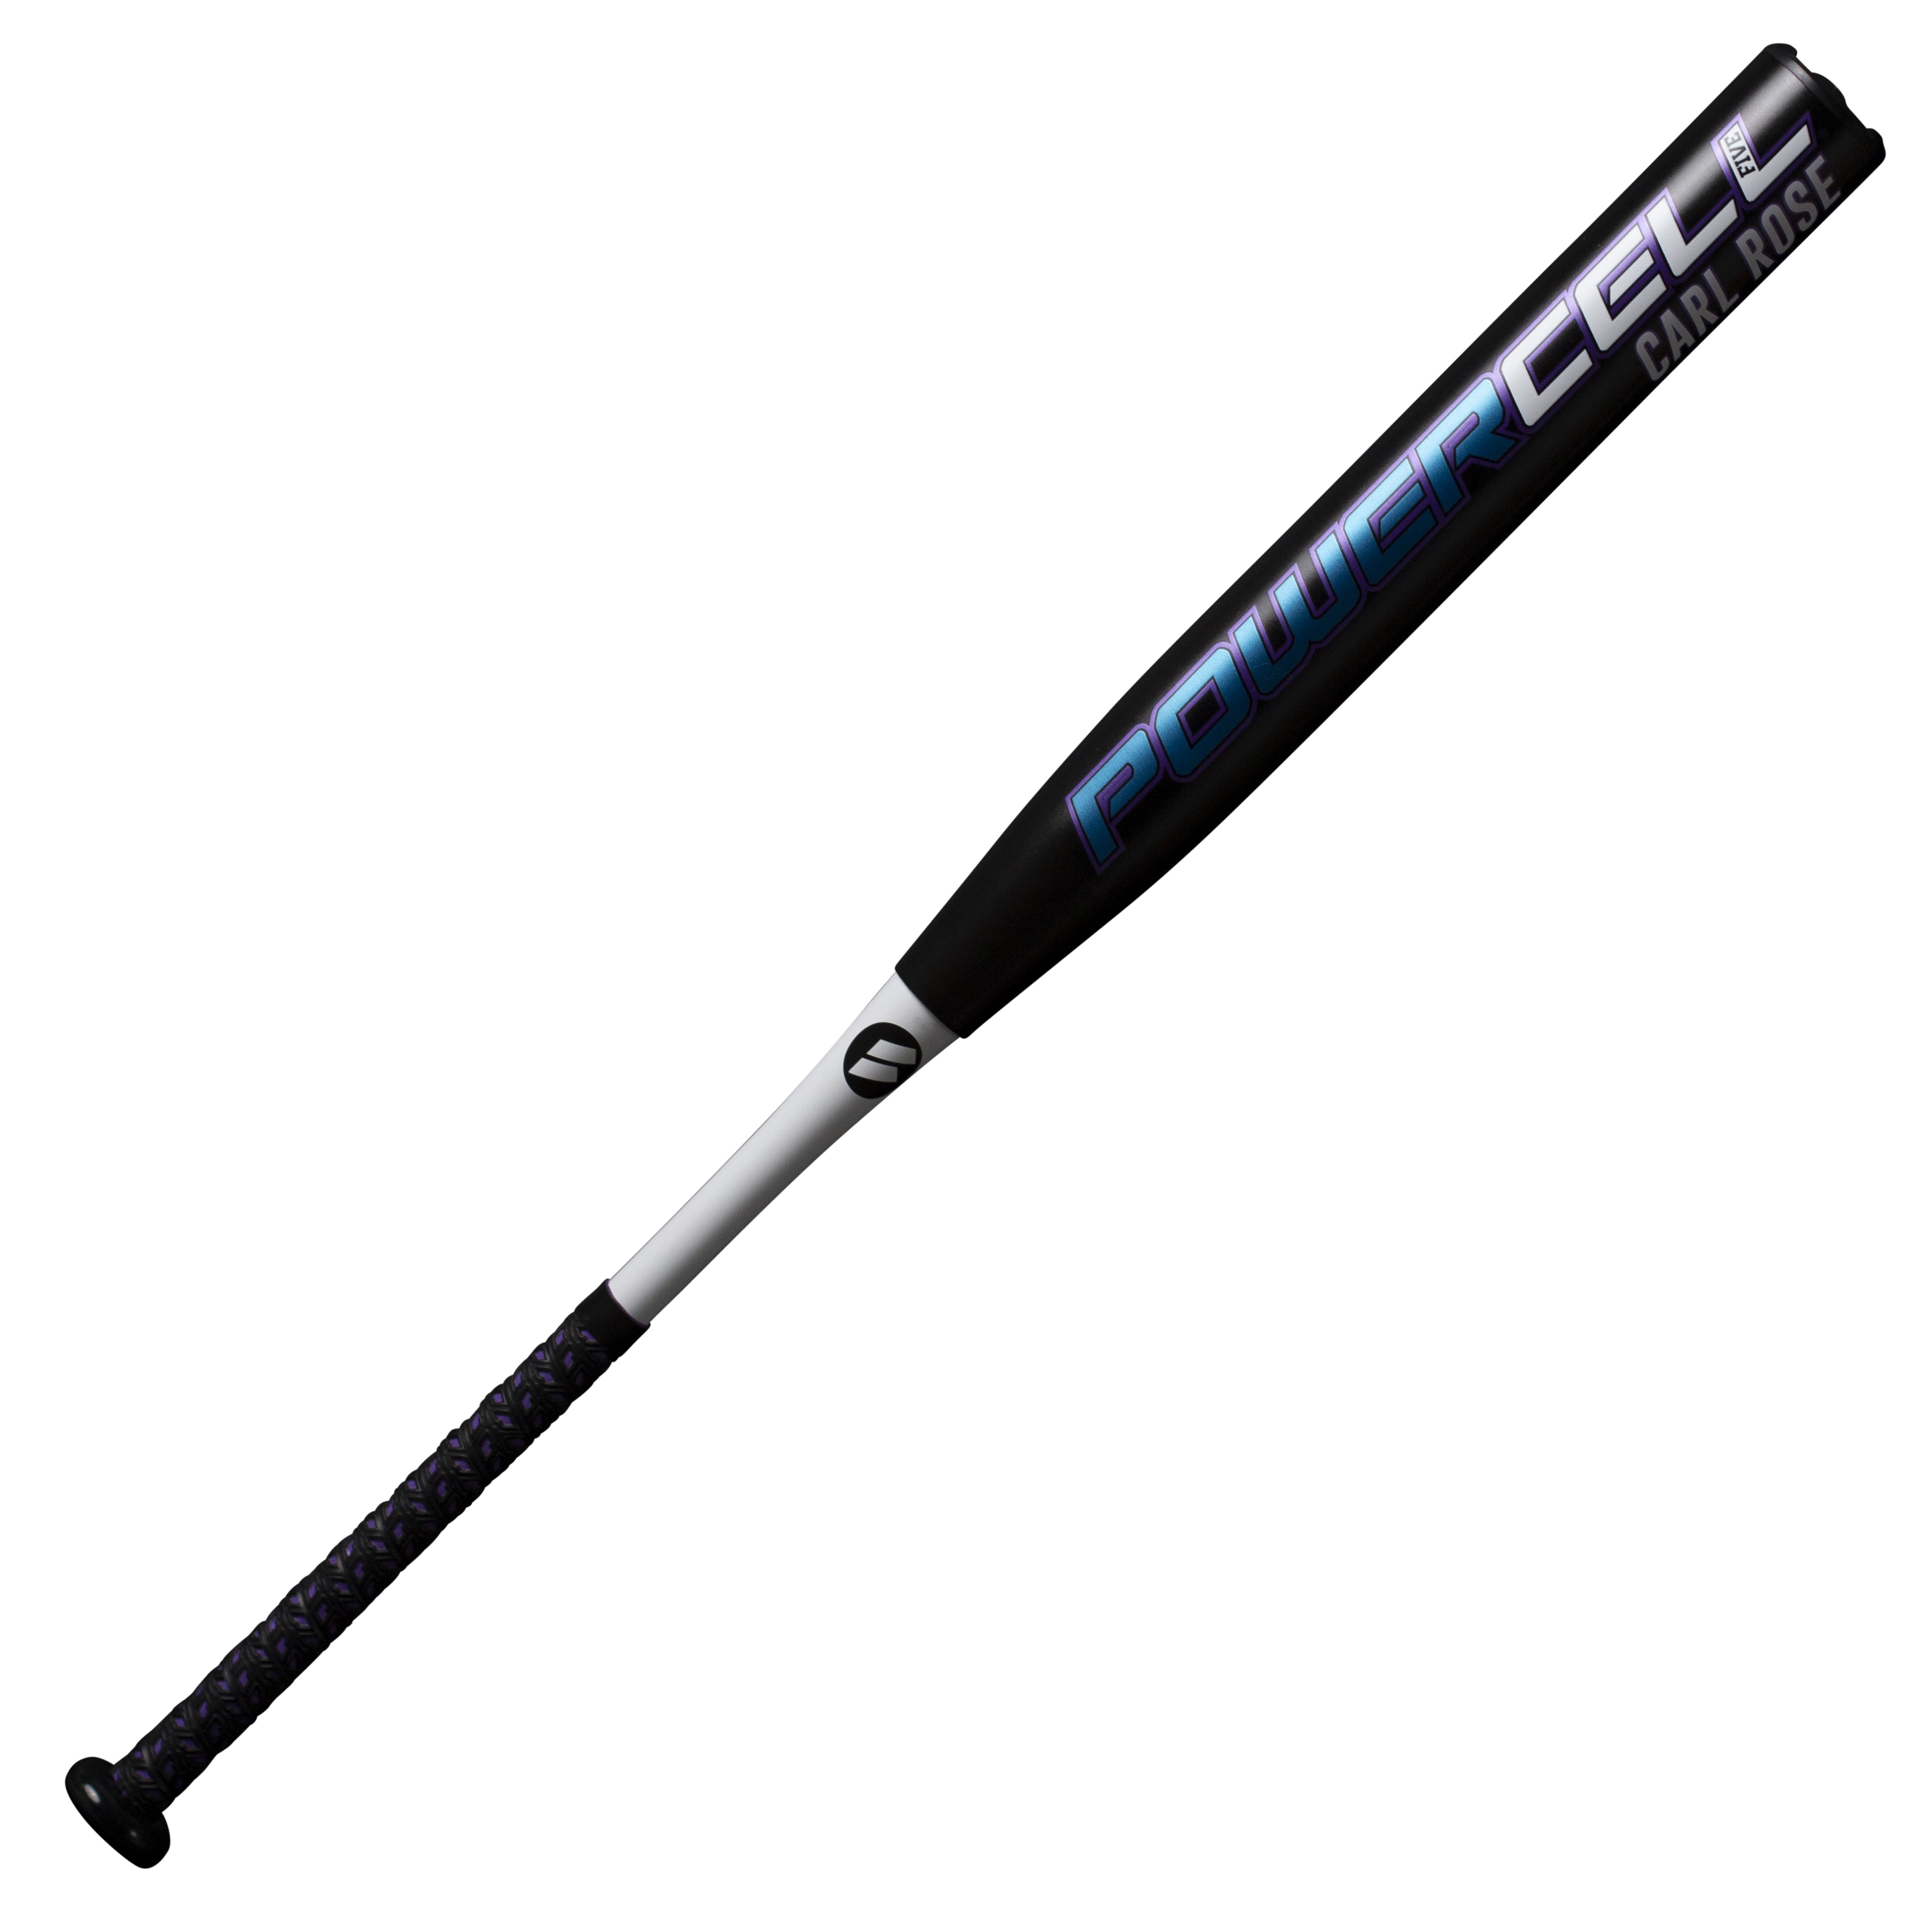 worth-carl-rose-powercell-slowpitch-softball-bat-13-5-usssa-34-inch-28-oz WCARLU-3-28 Worth 043365360945 <p>Worth Softball Bat honoring Carl Rose. The 2021 Worth Slow pitch